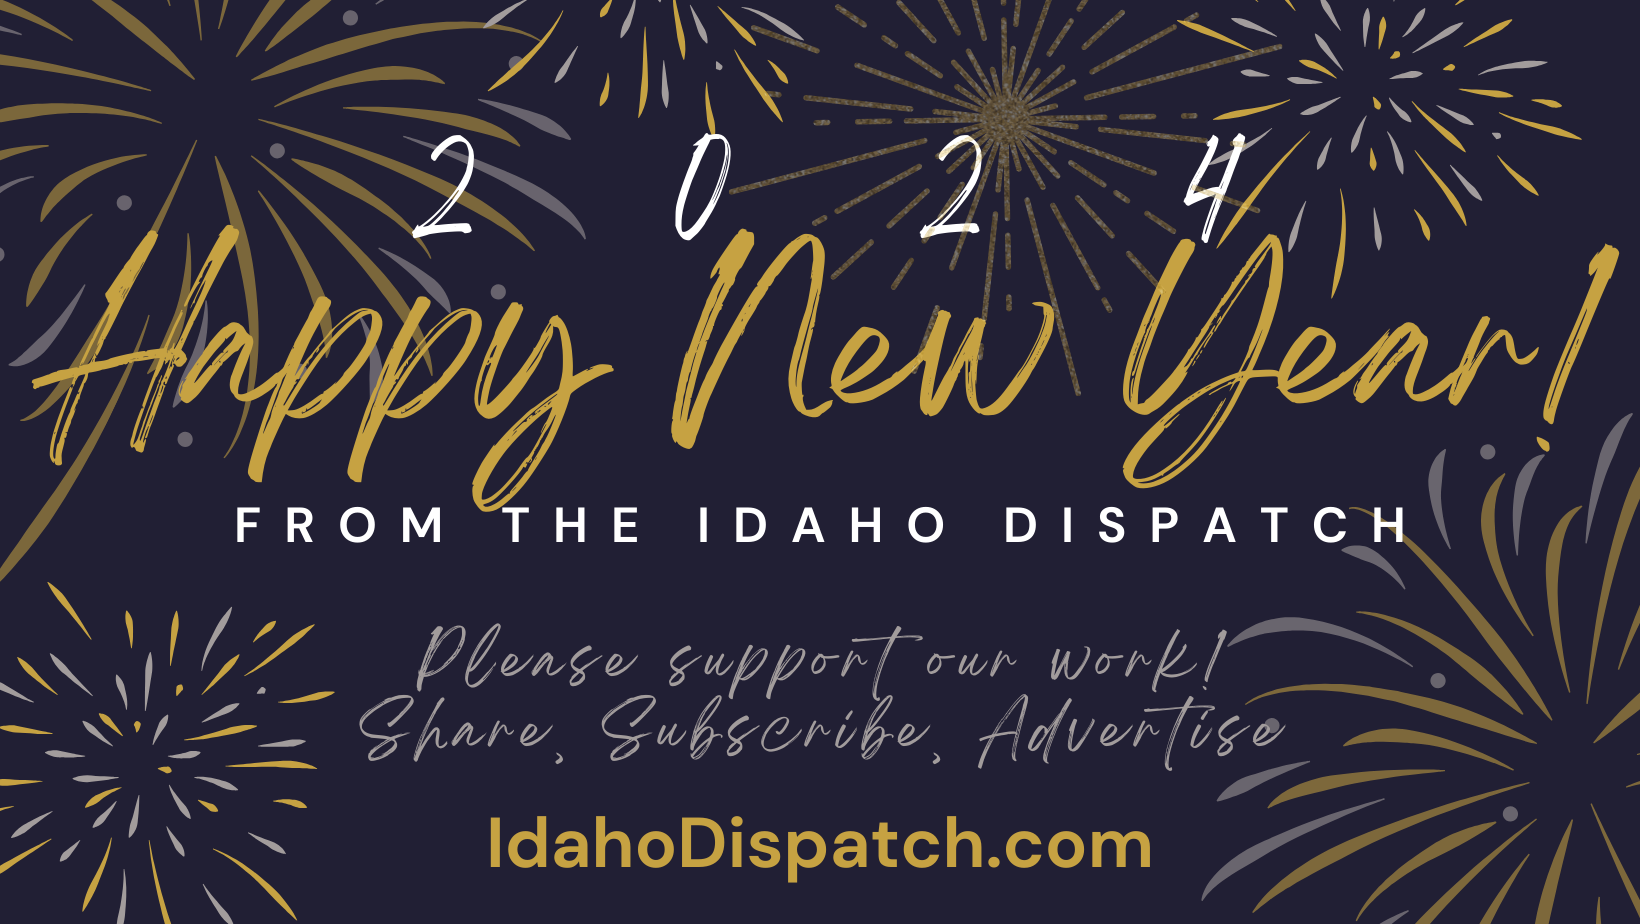 Happy New Year from the Idaho Dispatch Team!